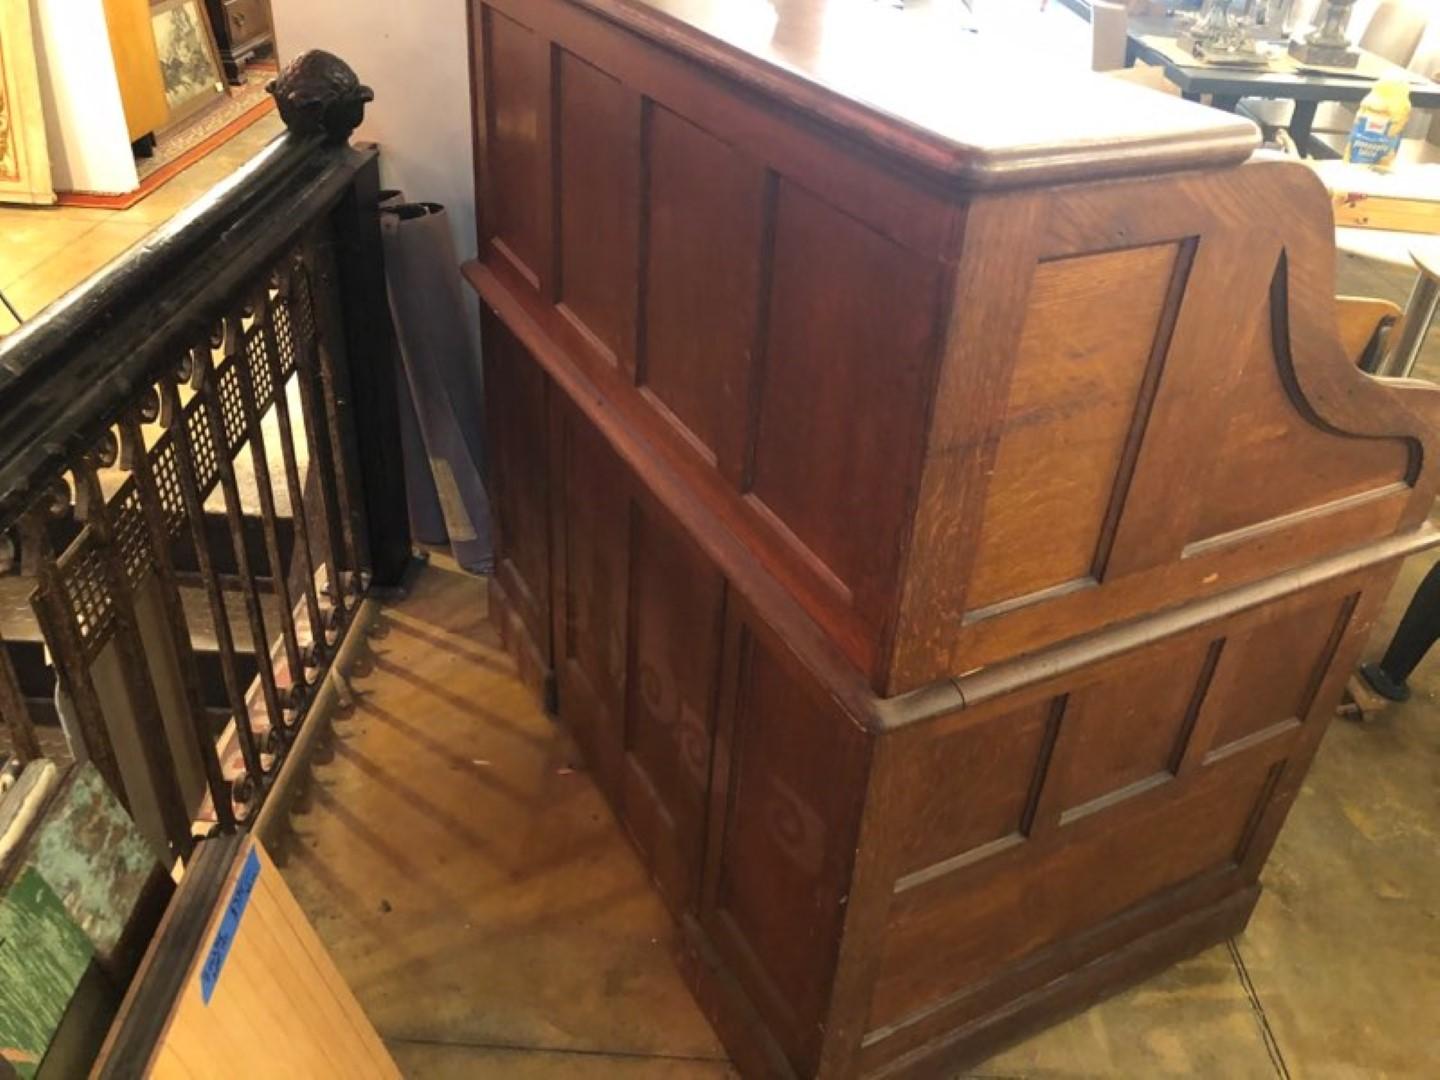 Wood 1880s Oak Roll Top Desk with Seven Drawers and Neat Cubbyhole Storage